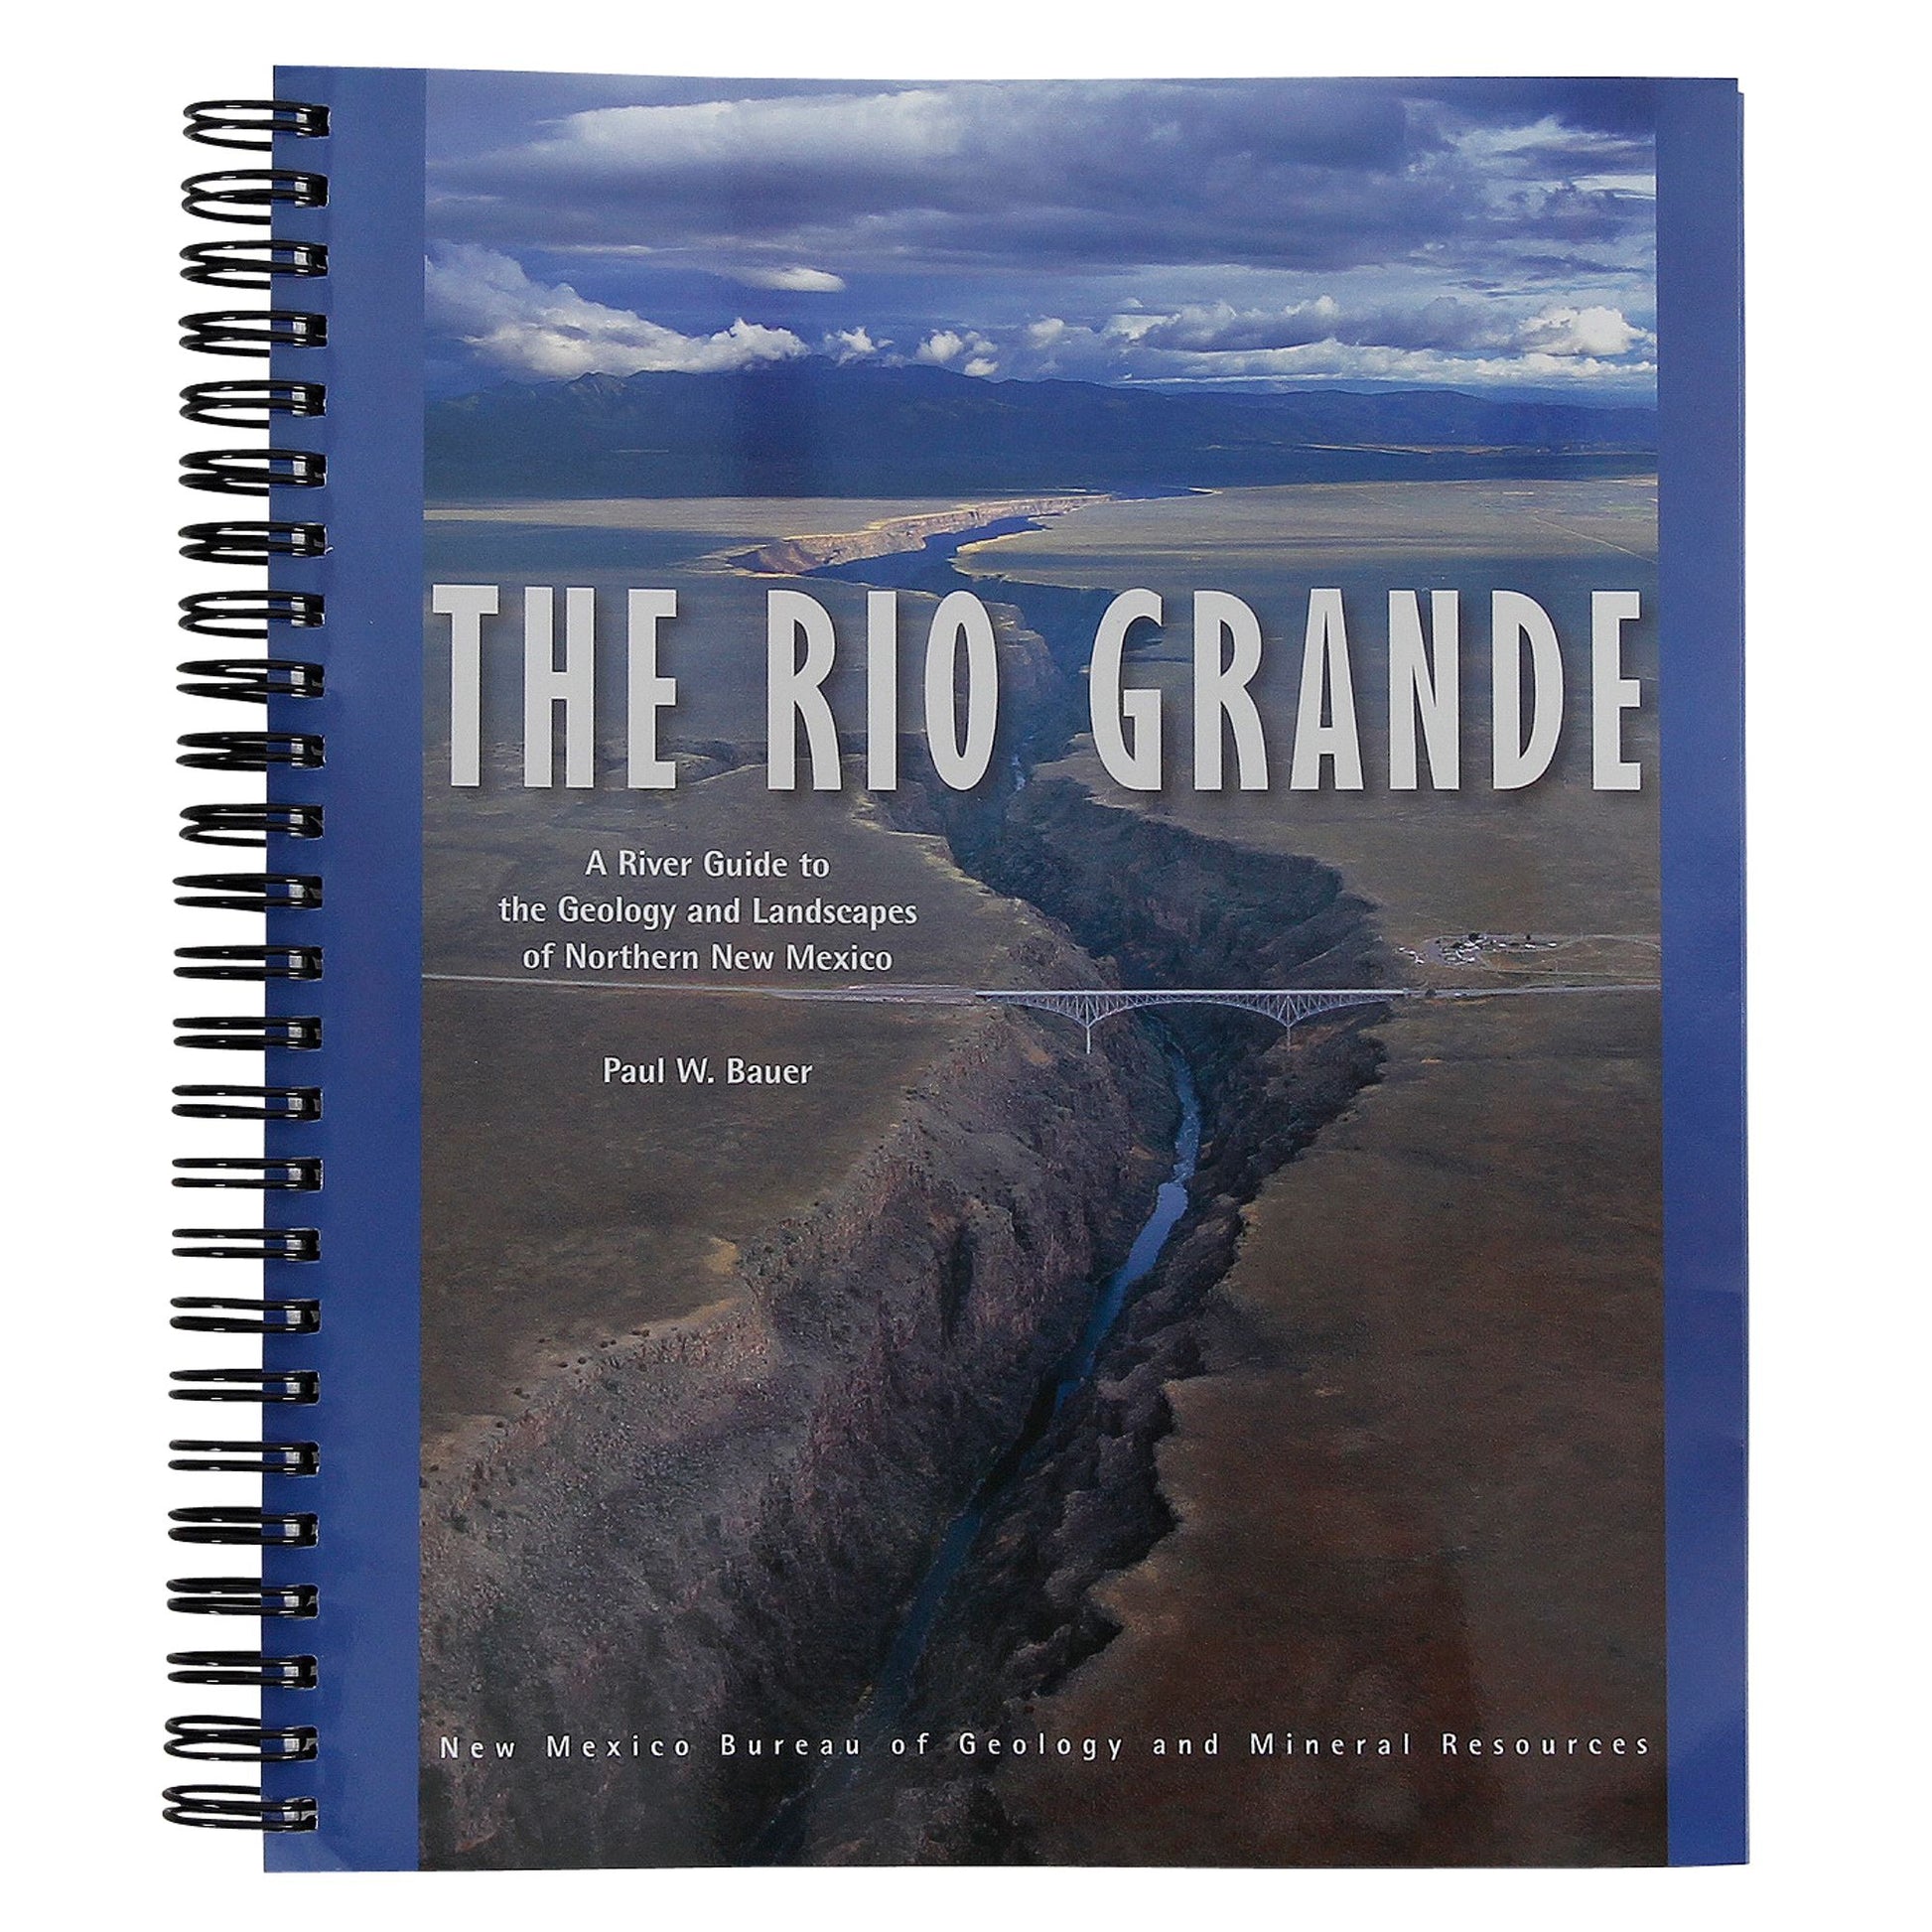 A spiral-bound book titled "Rio Grande River Guide to the Geology and Landscapes of Northern New Mexico" by Paul W. Bauer, with an aerial photograph of the Rio Grande on the cover, published by New Mexico Bureau of Geology & Mineral Resources.